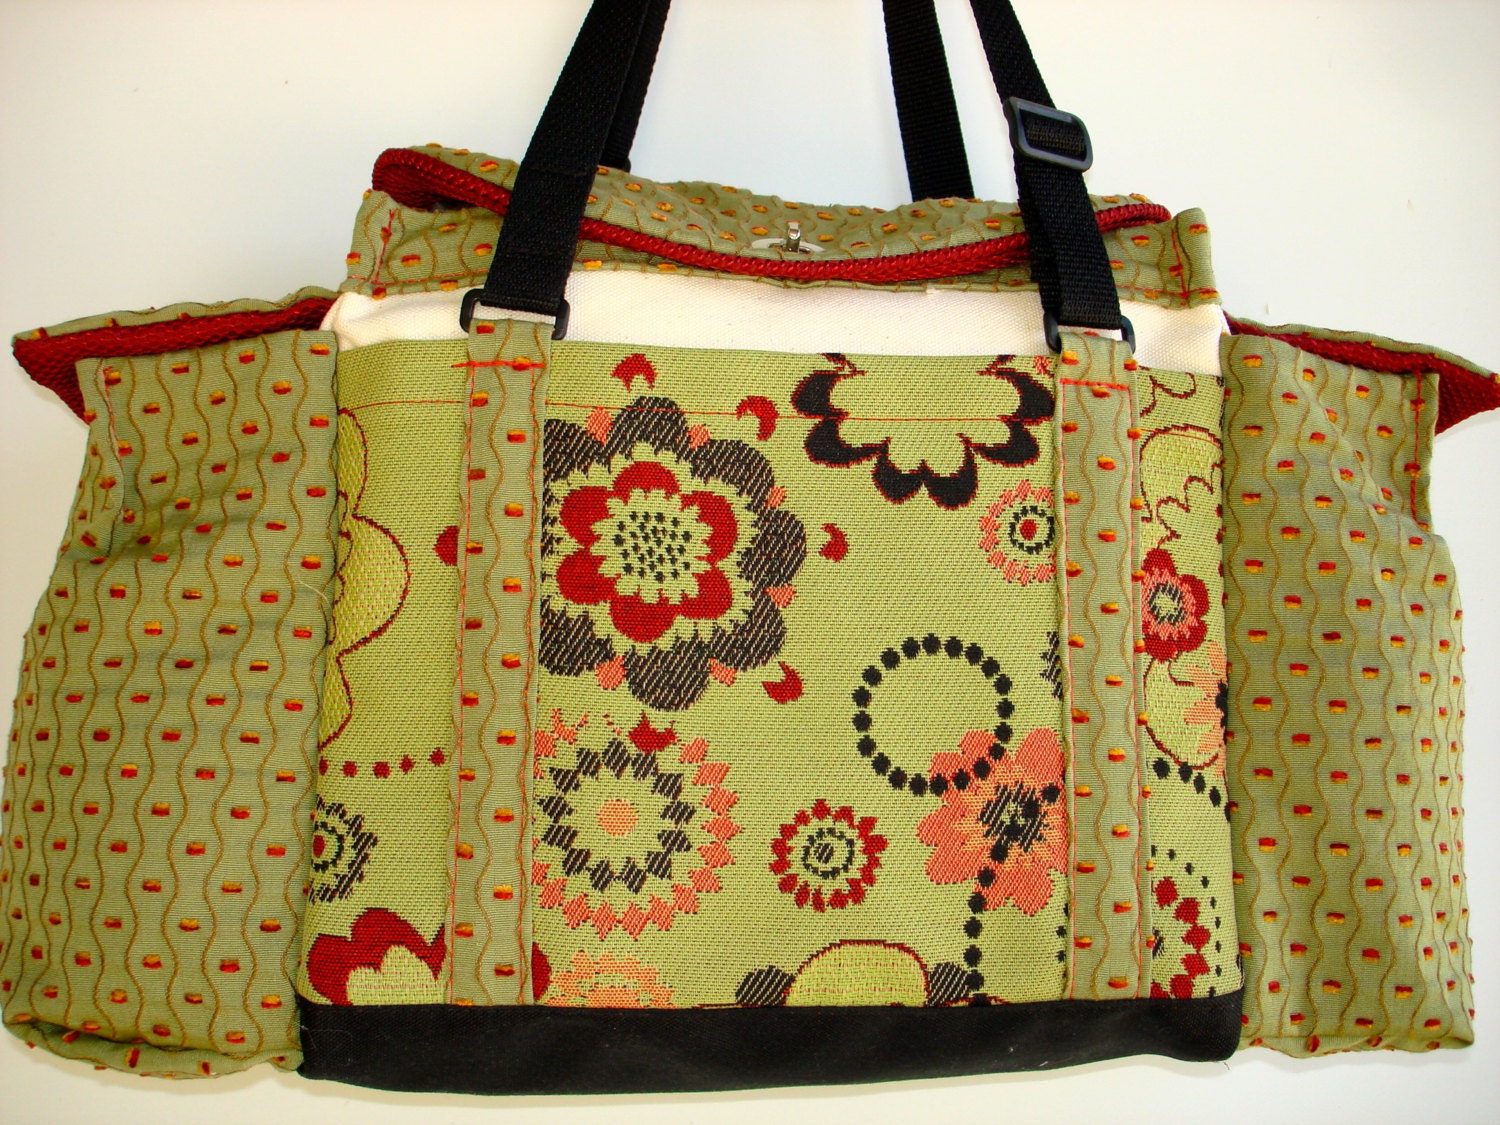 Deluxe Knitting/Crochet Tote Bag/Project Bag/Two Pocket Yarn